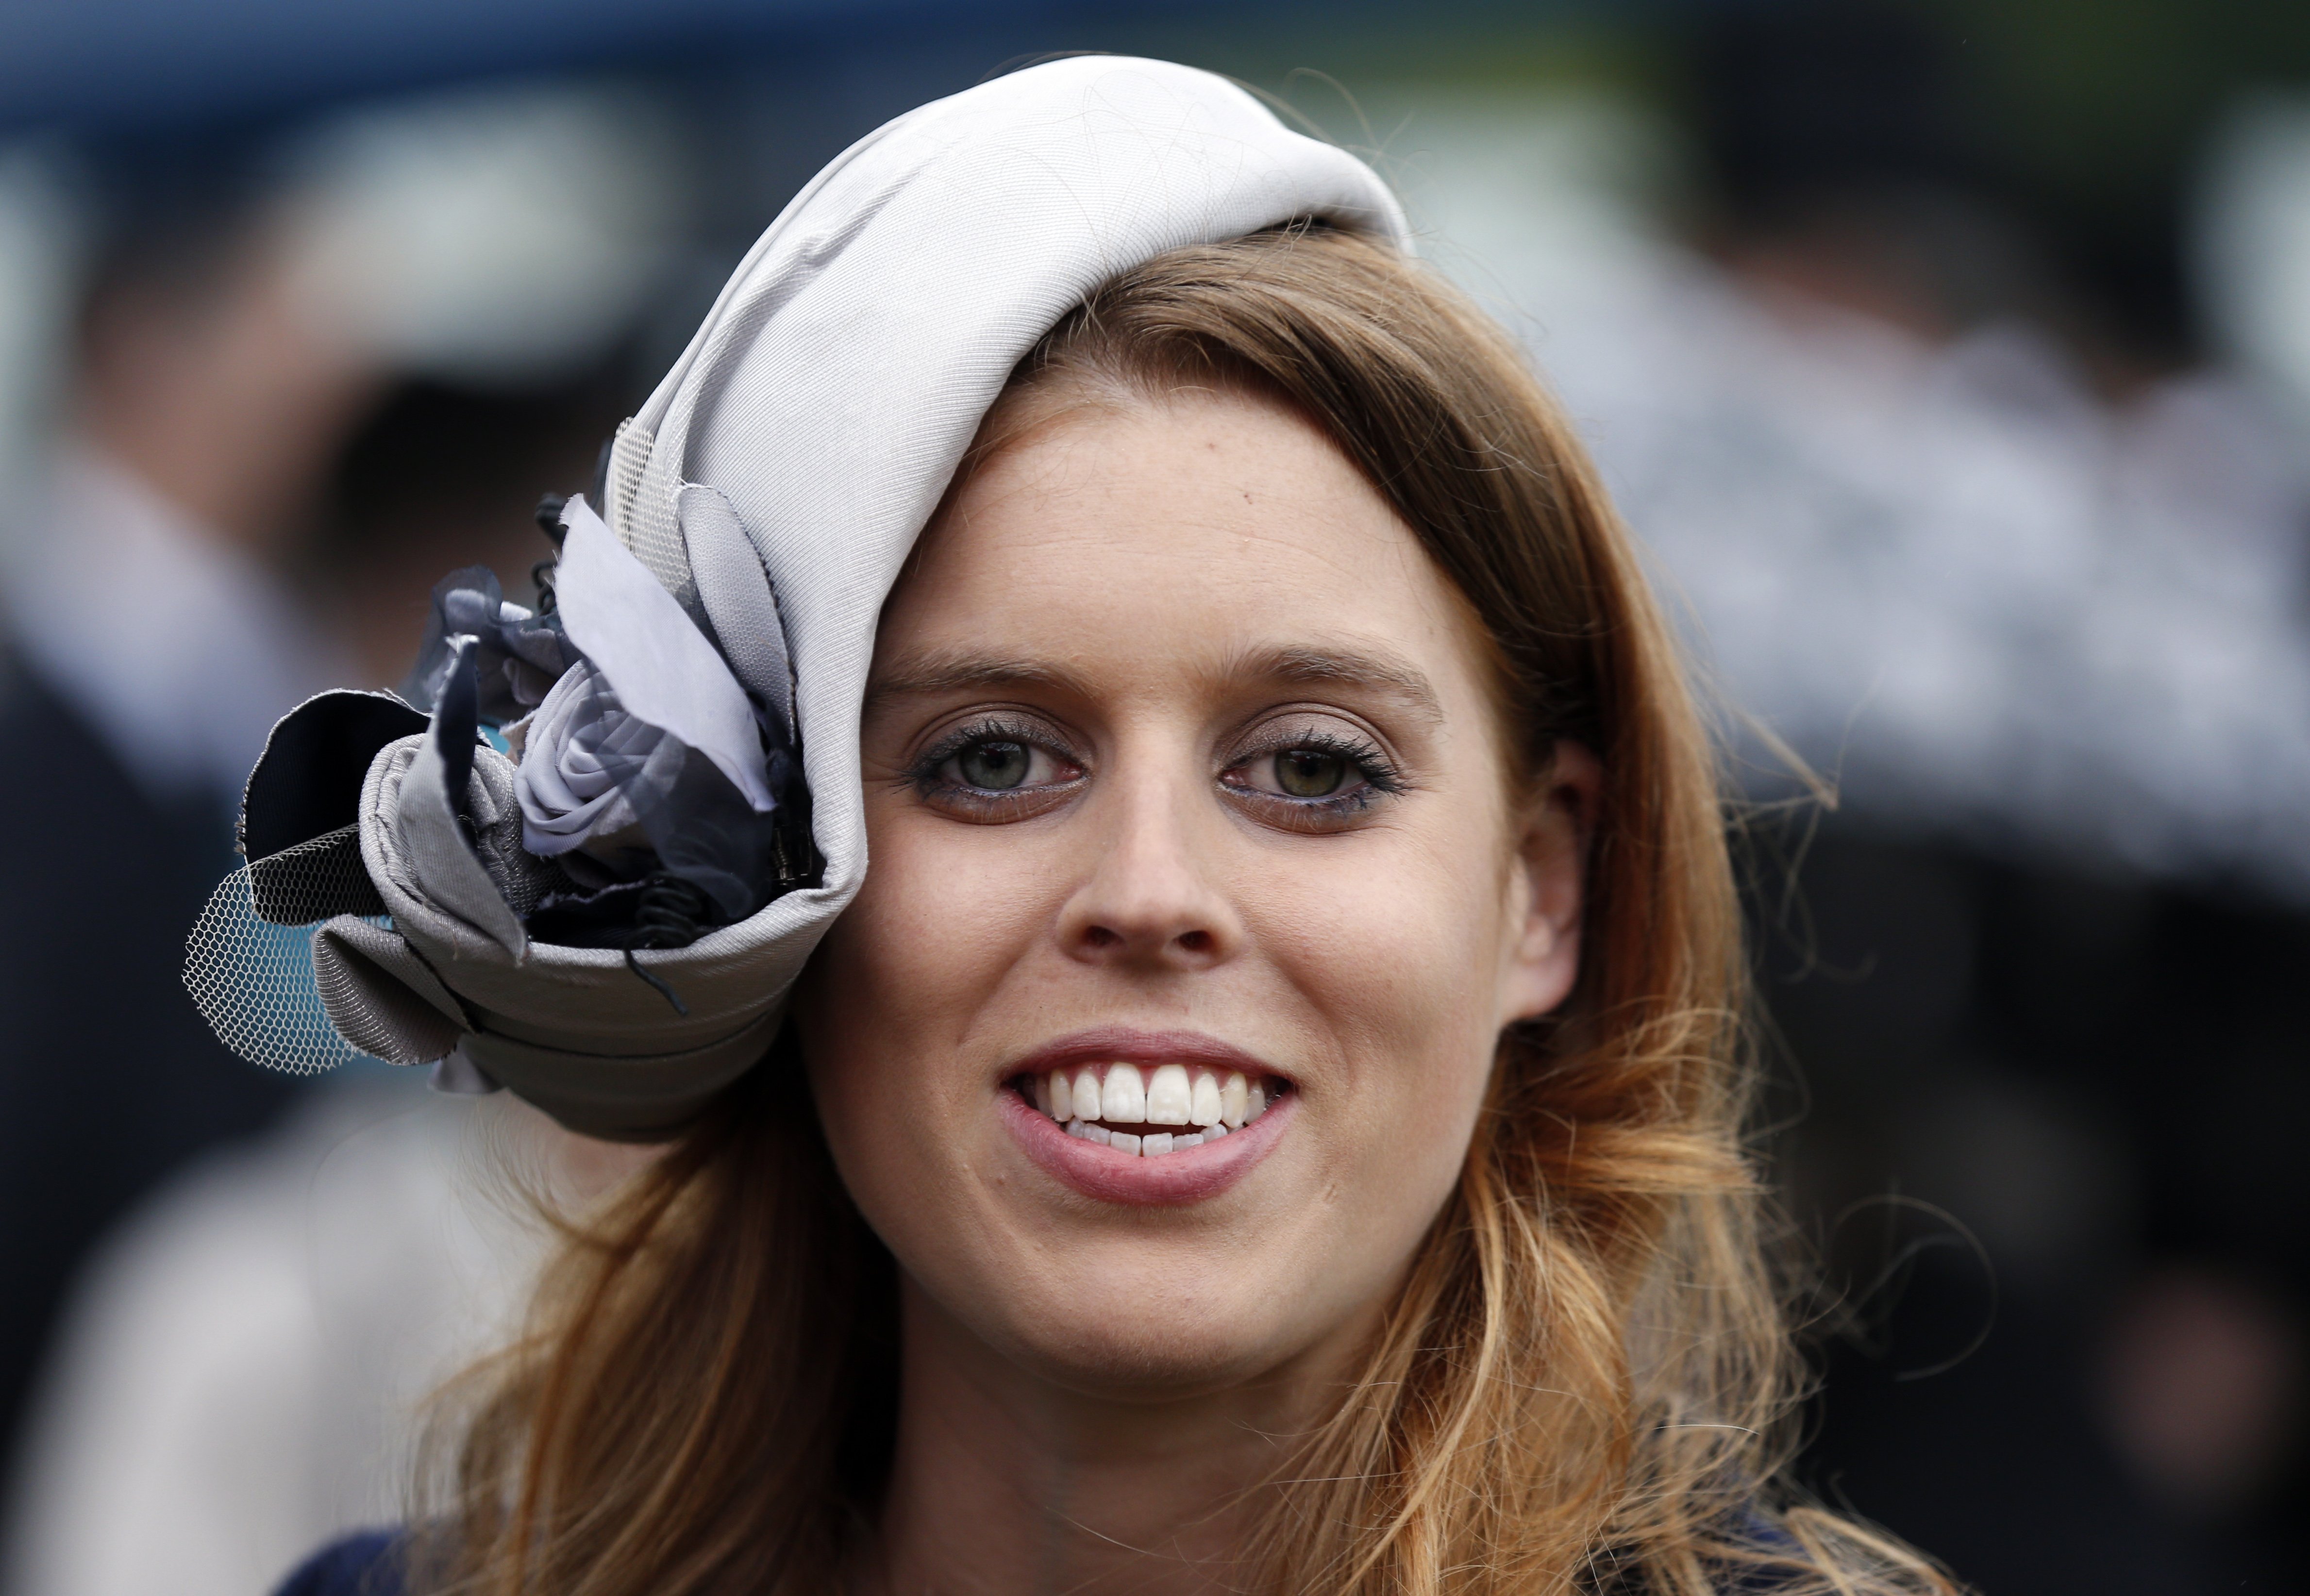 Princess Beatrice smiles during a garden party held at Buckingham Palace, on May 30, 2013 in London, England. | Source: Getty Imges